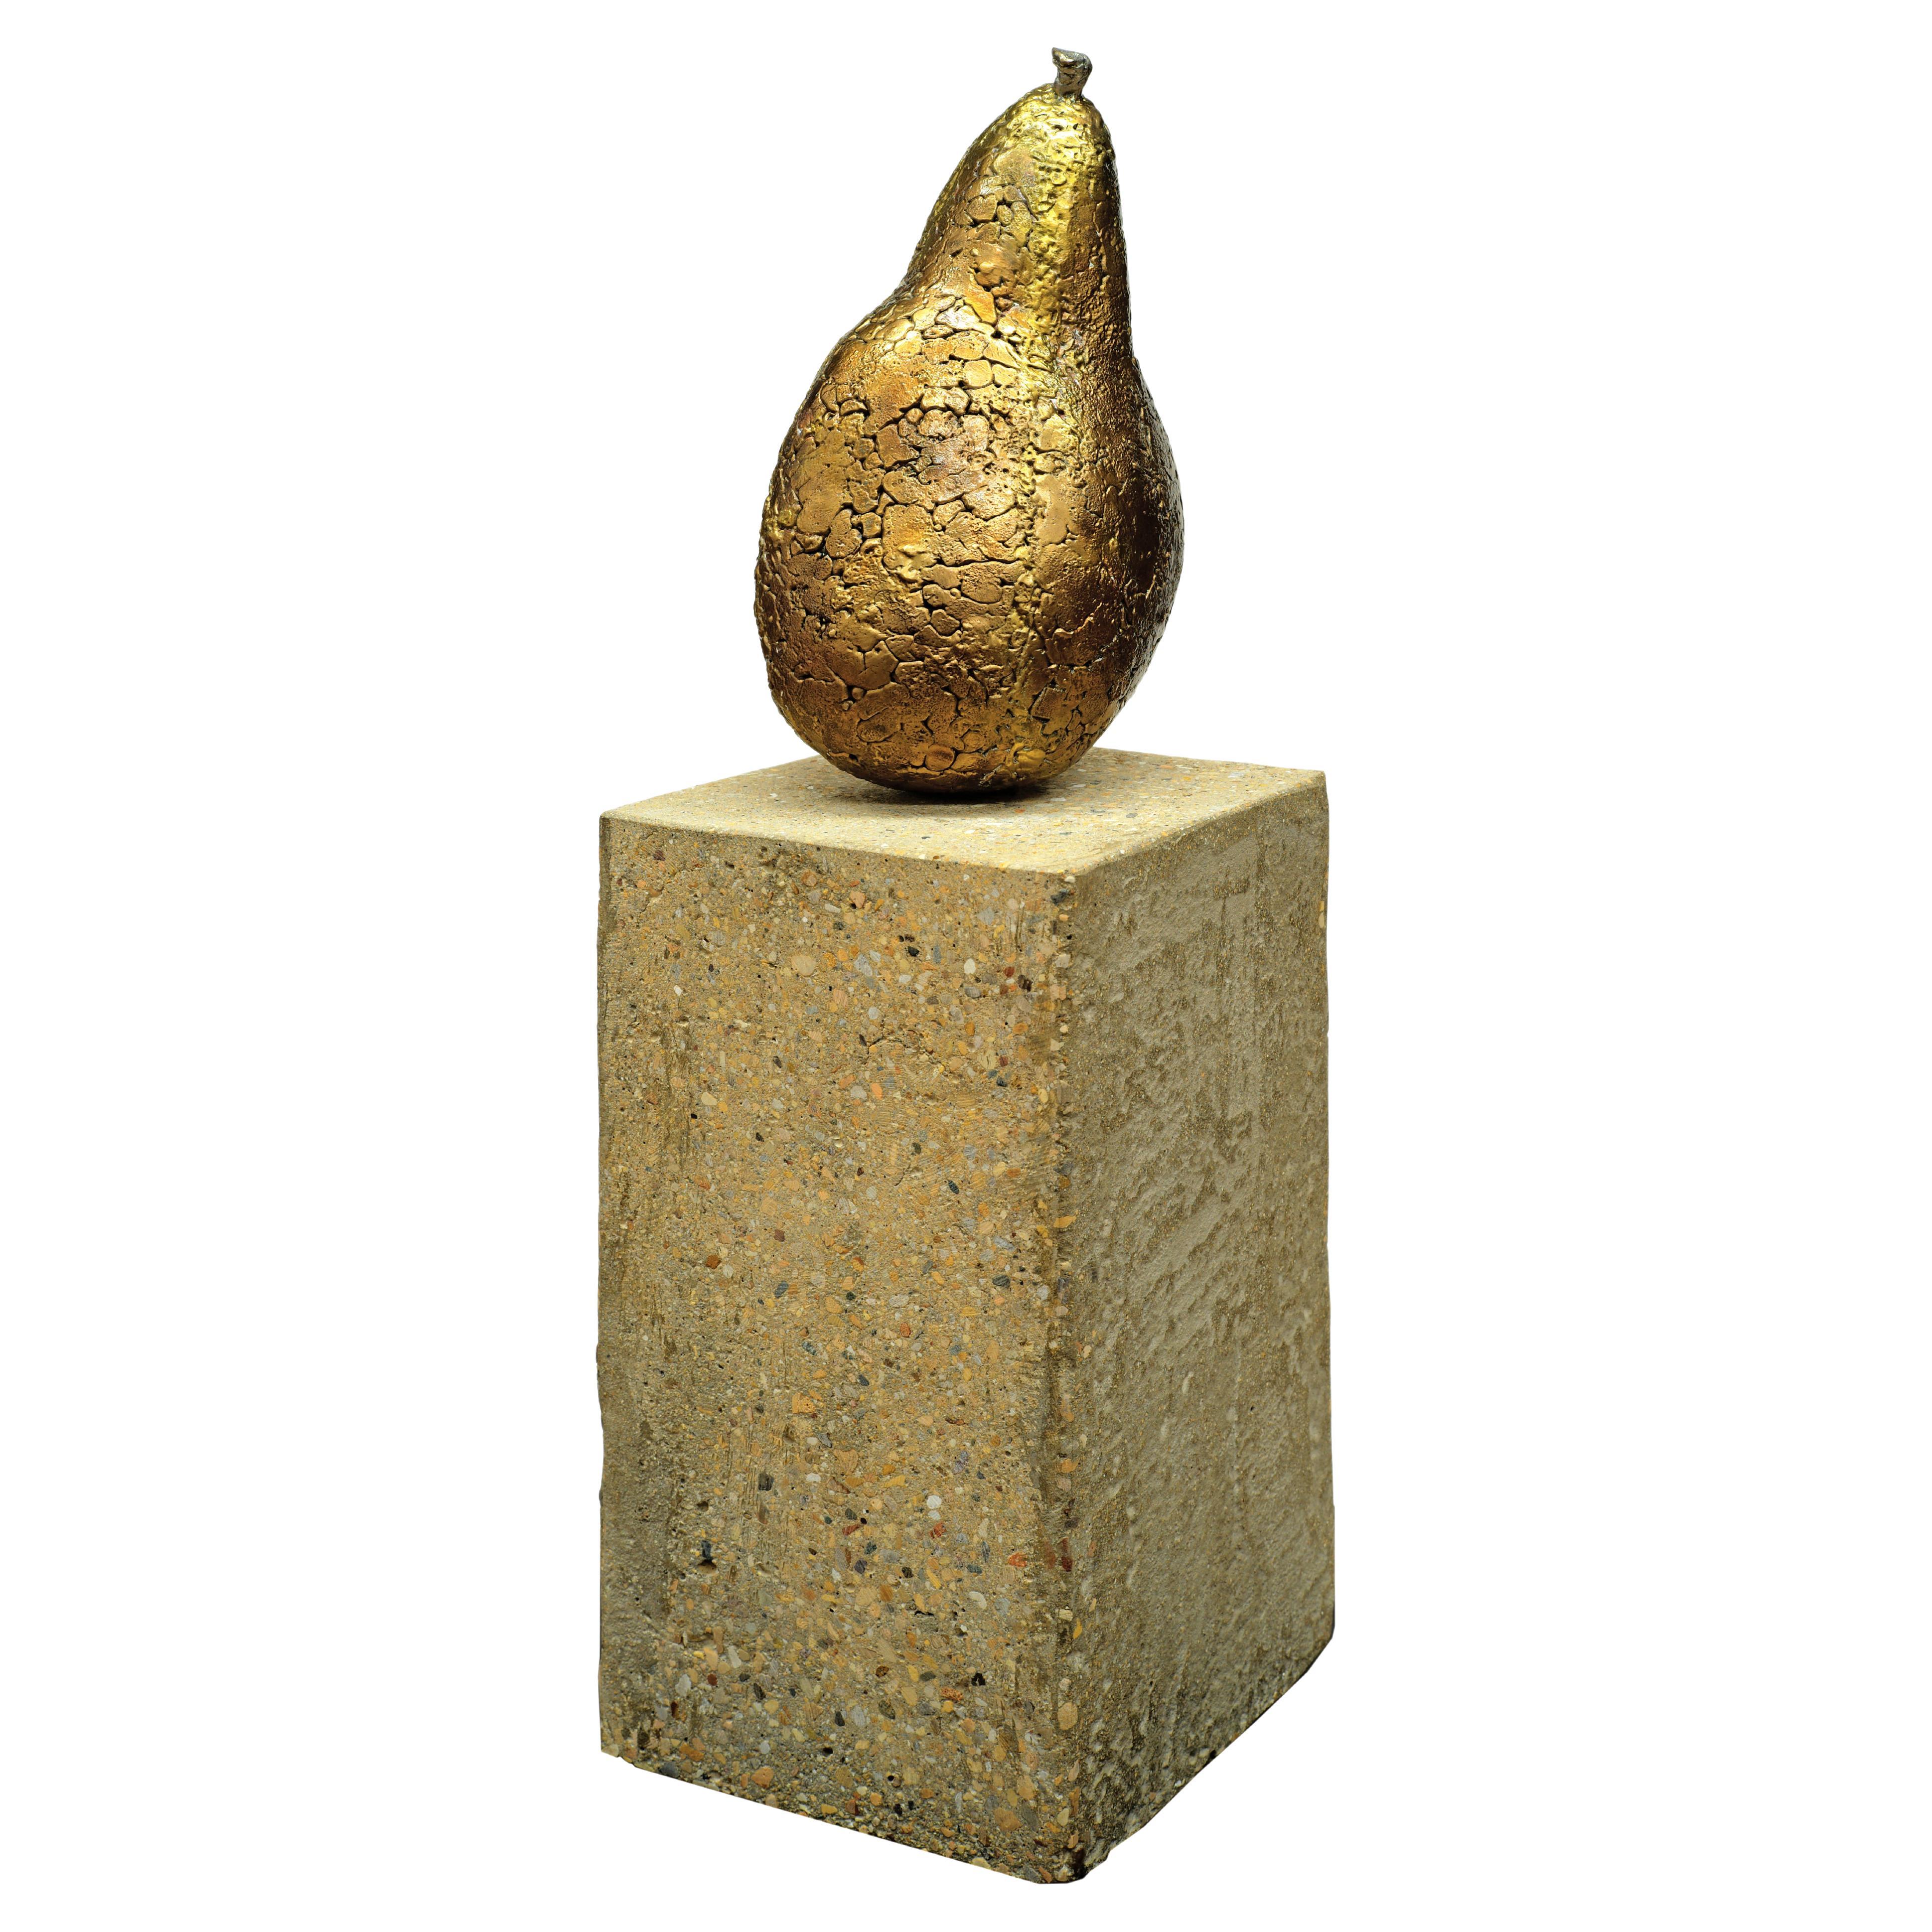 Autumn Pear, Bronze Sculpture with Textured Golden Surface on Concrete Base